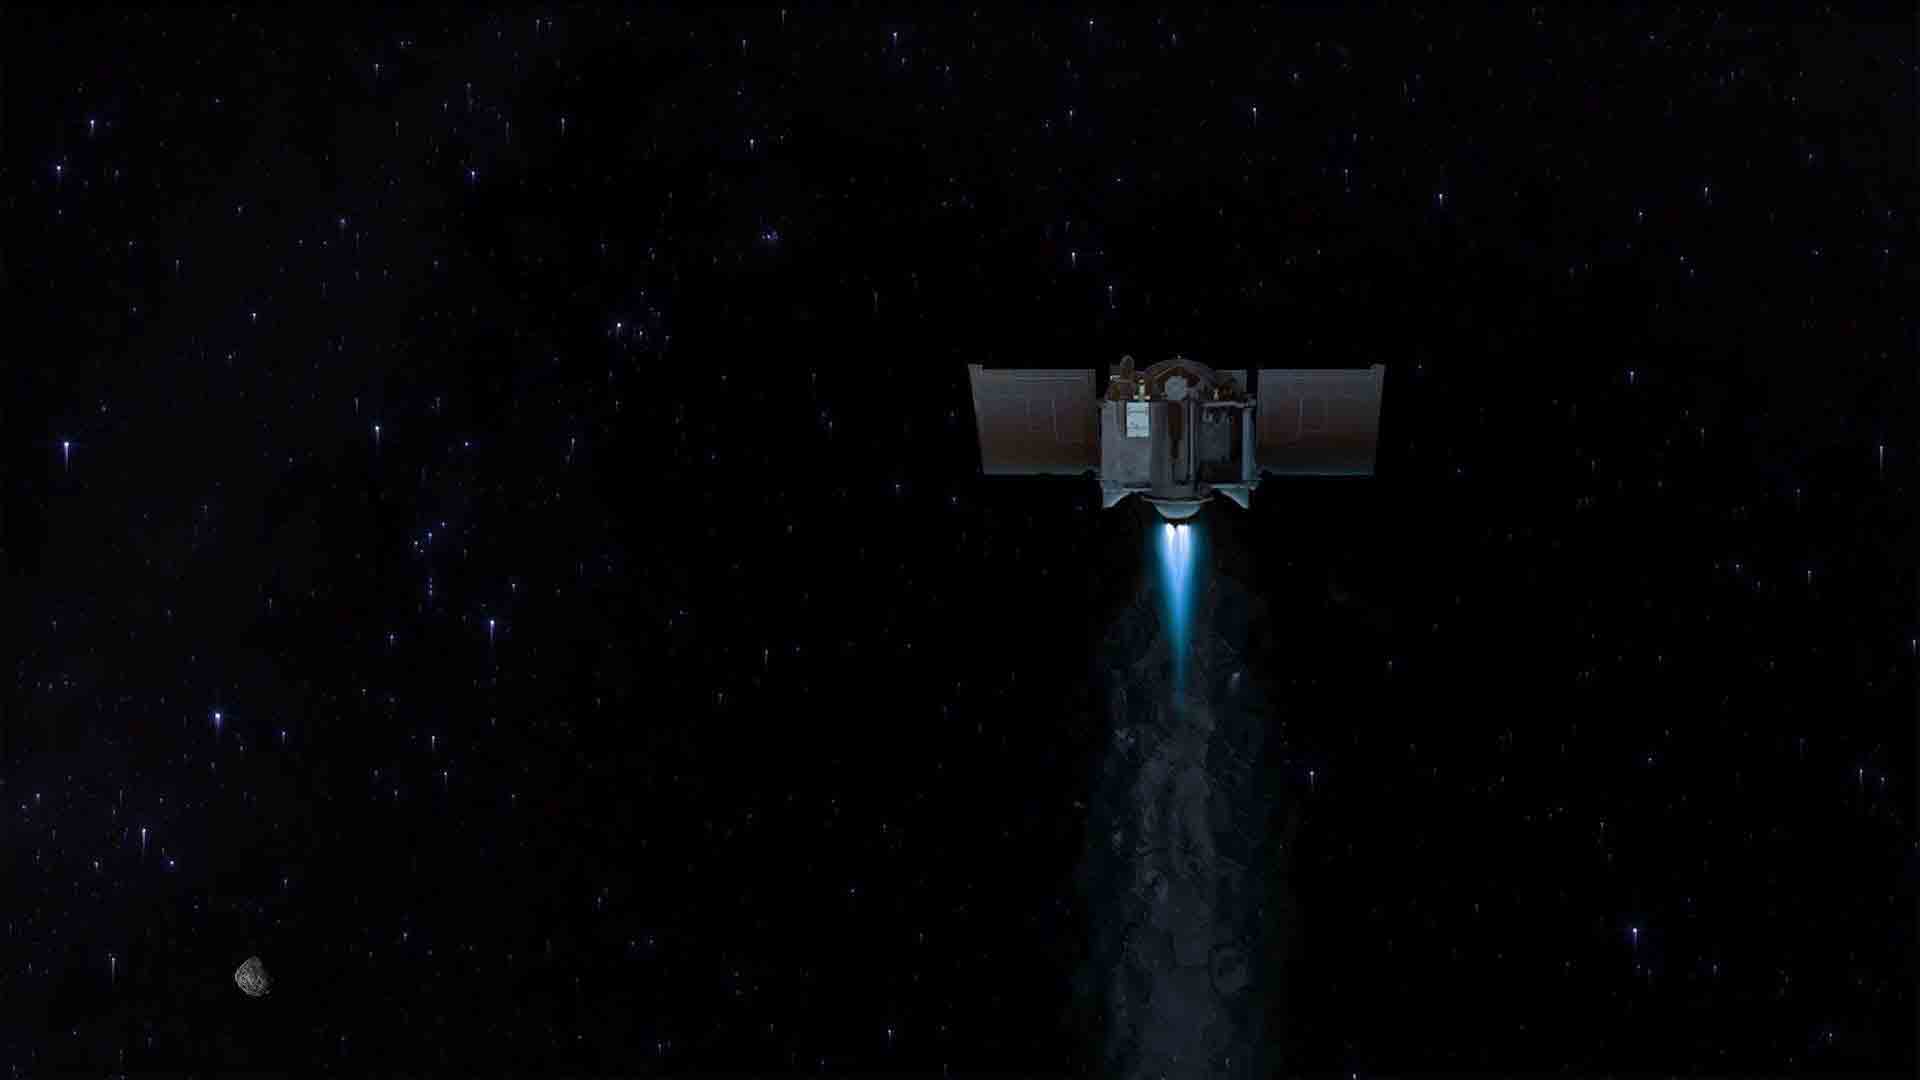  Episode 326: A new mission for Osiris REx